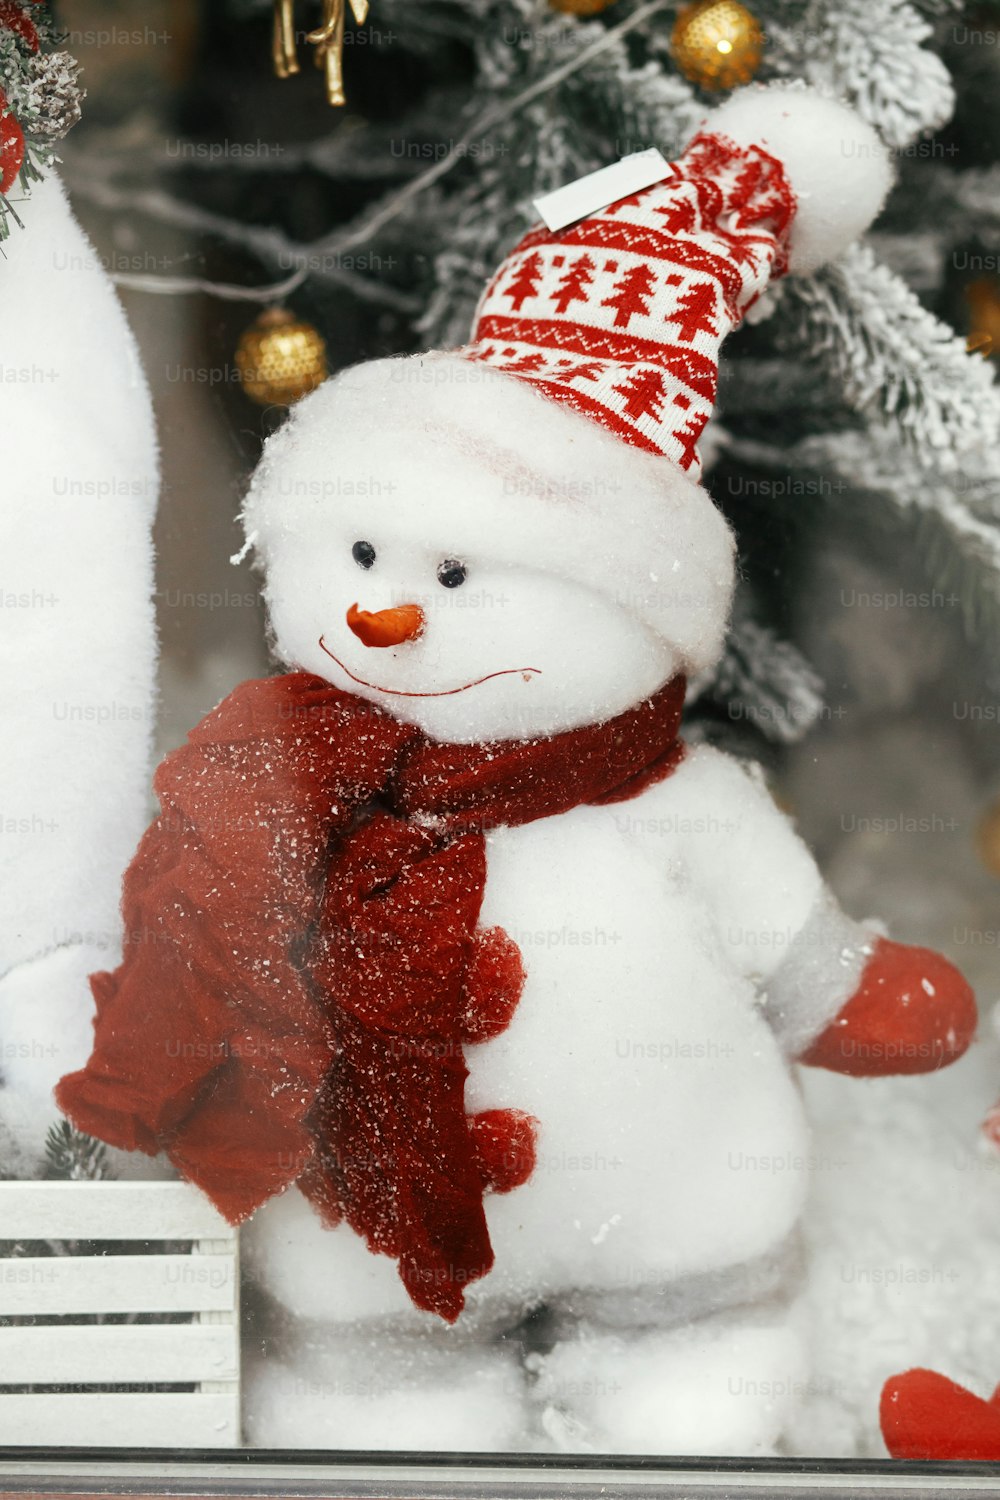 750+ Snowman Pictures | Download Free Images on Unsplash